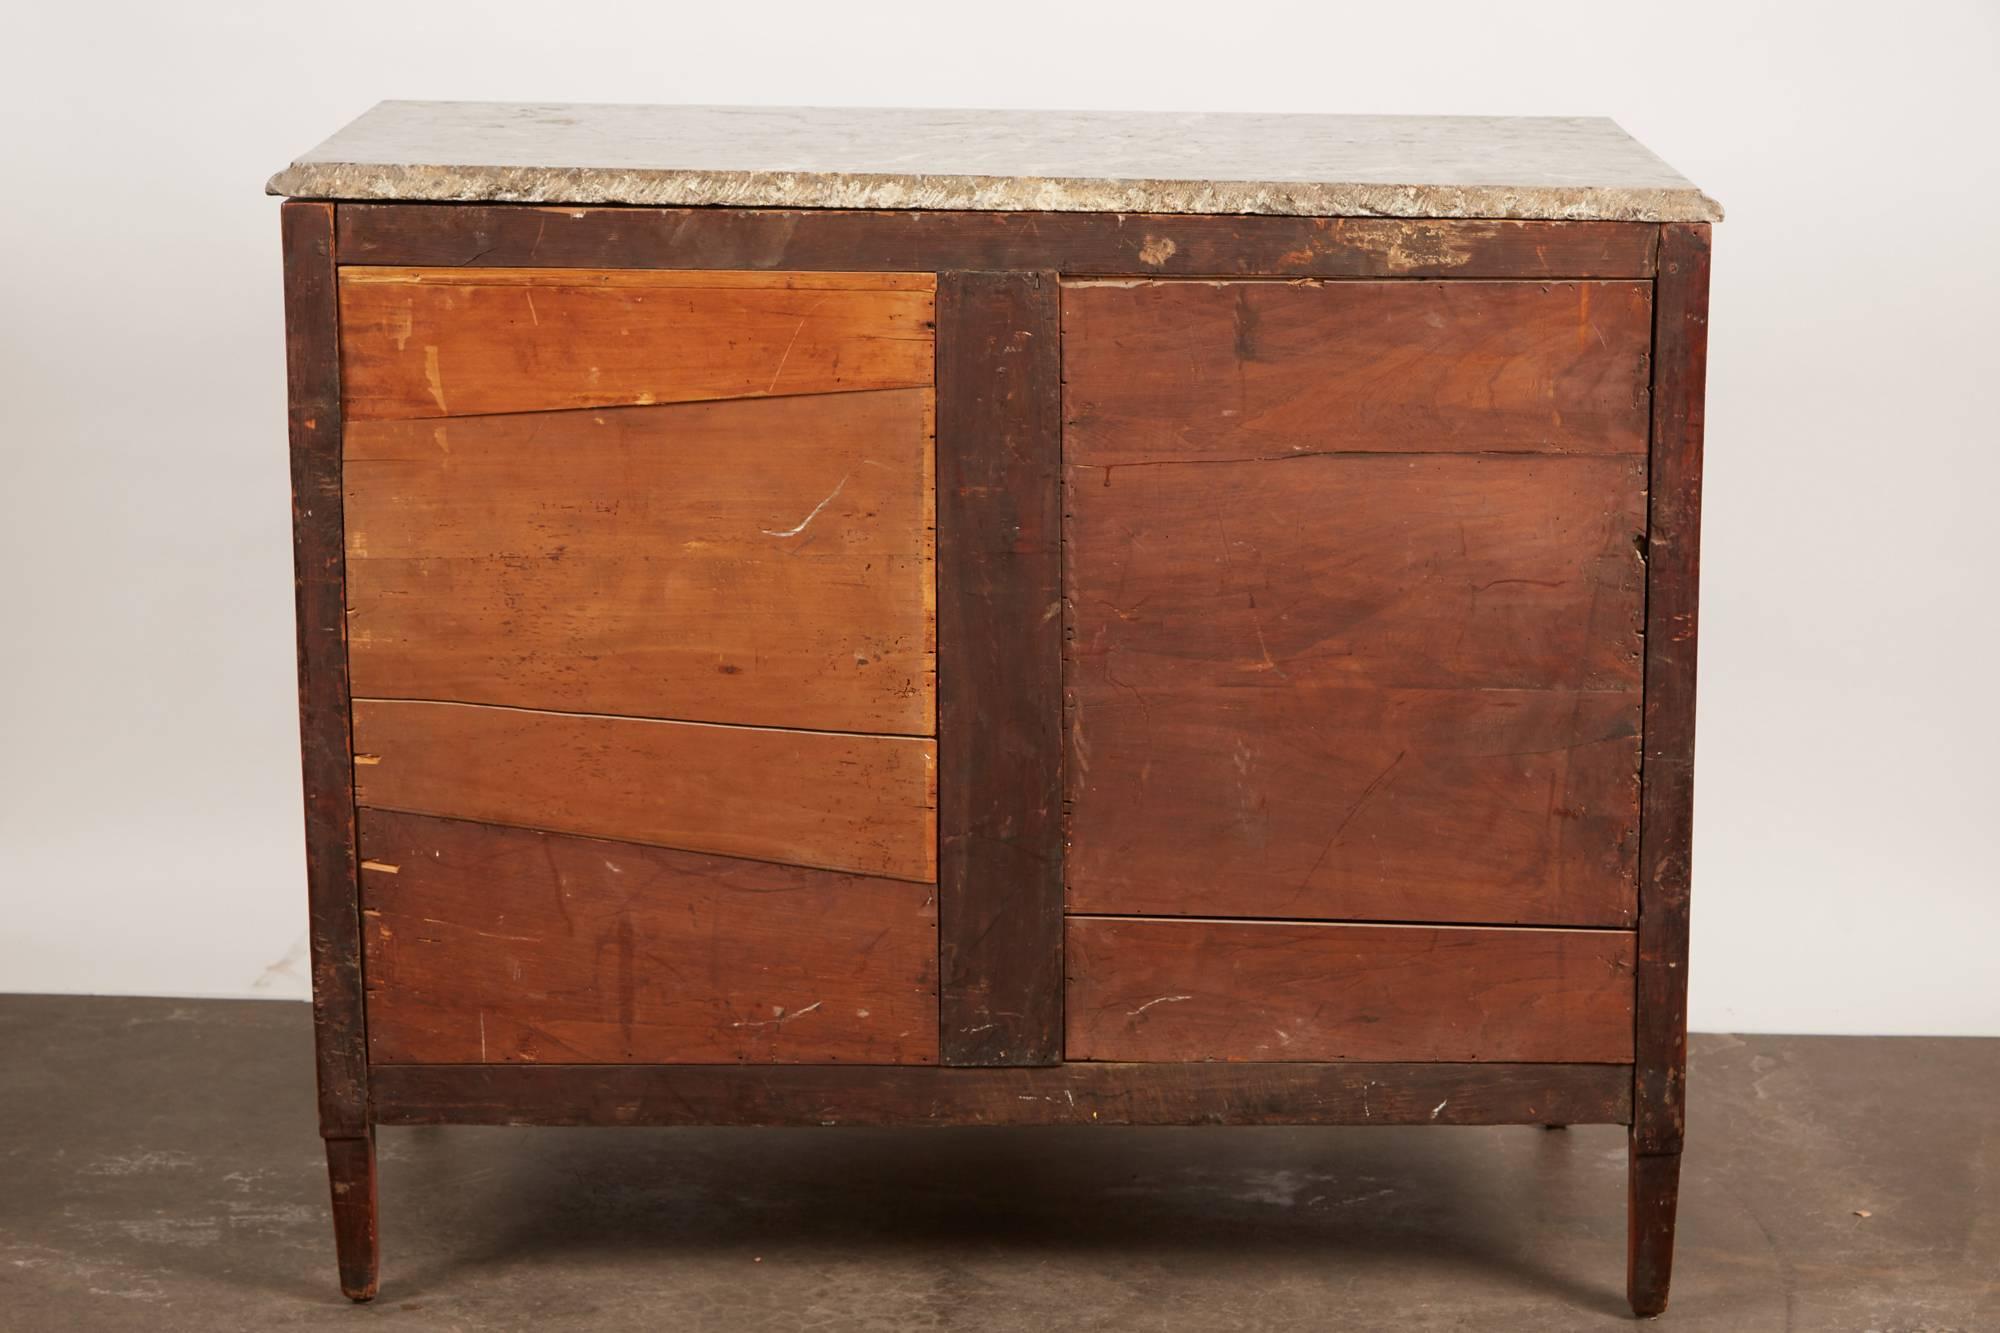 18th Century Italian Neoclassical Inlaid Chest of Drawers with Marble Top For Sale 5